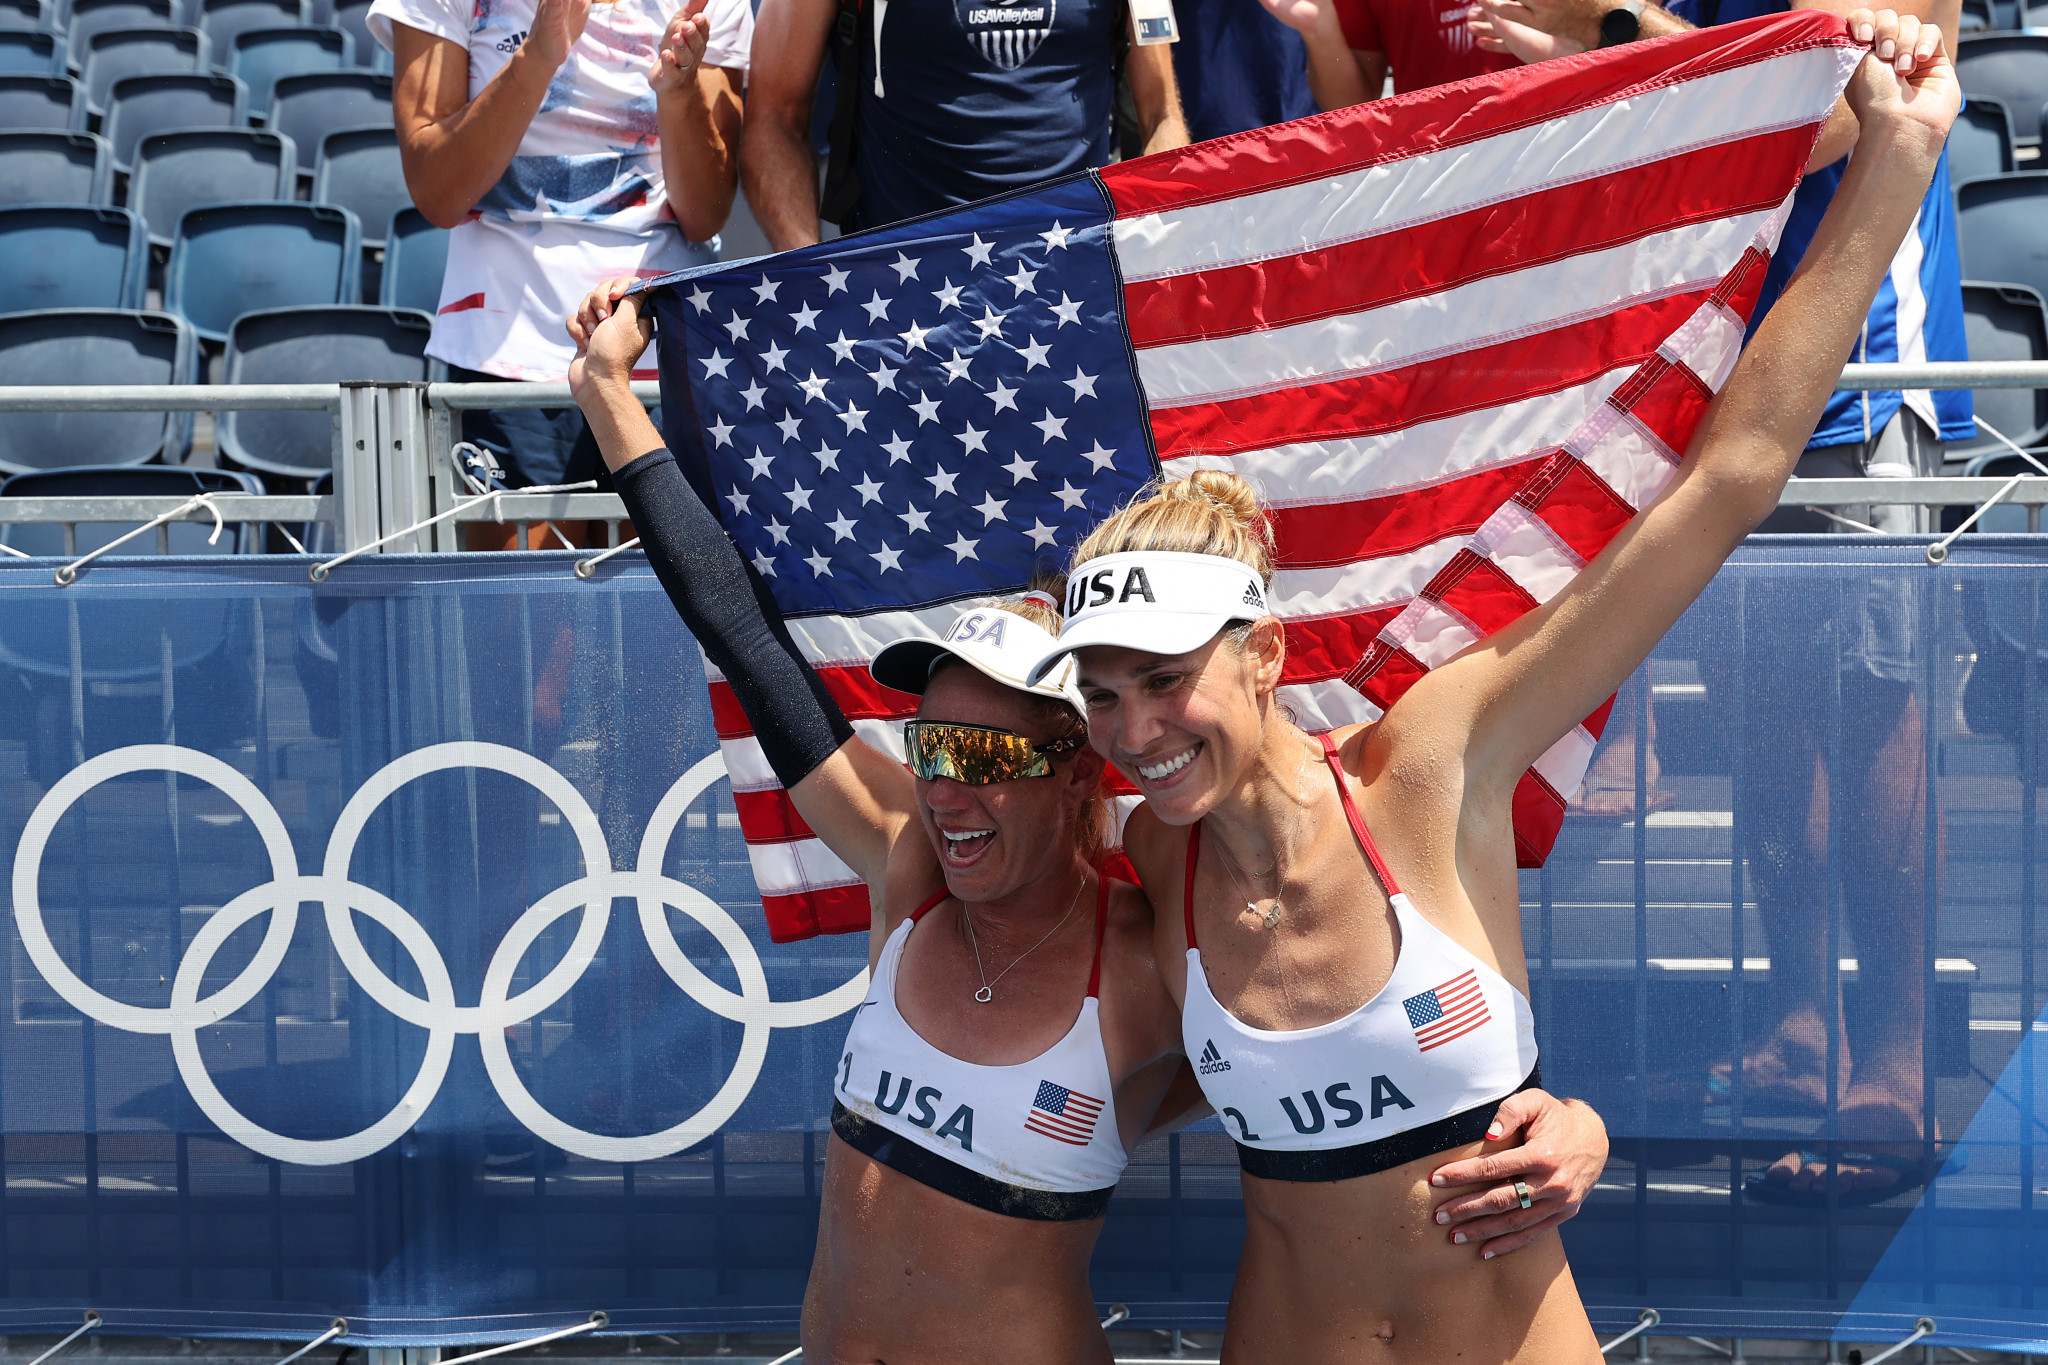 April Ross, left, and Alix Klineman claimed women's beach volleyball gold for the United States ©Getty Images